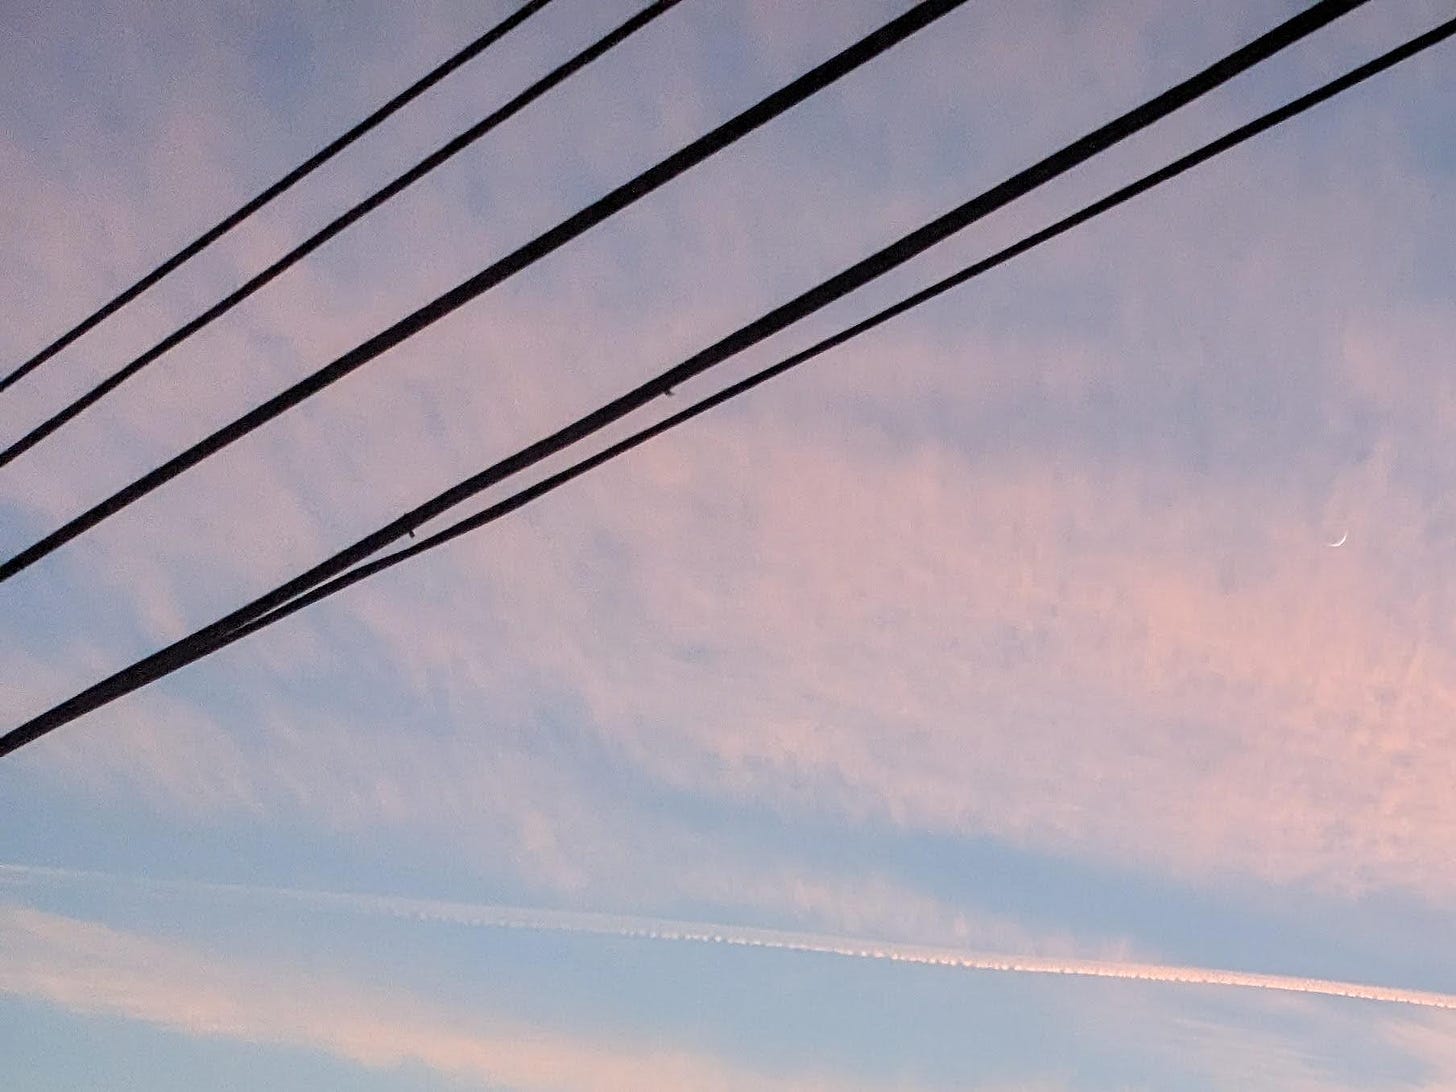 Photograph of telephone wires against a pink-and-blue clouded sunset.